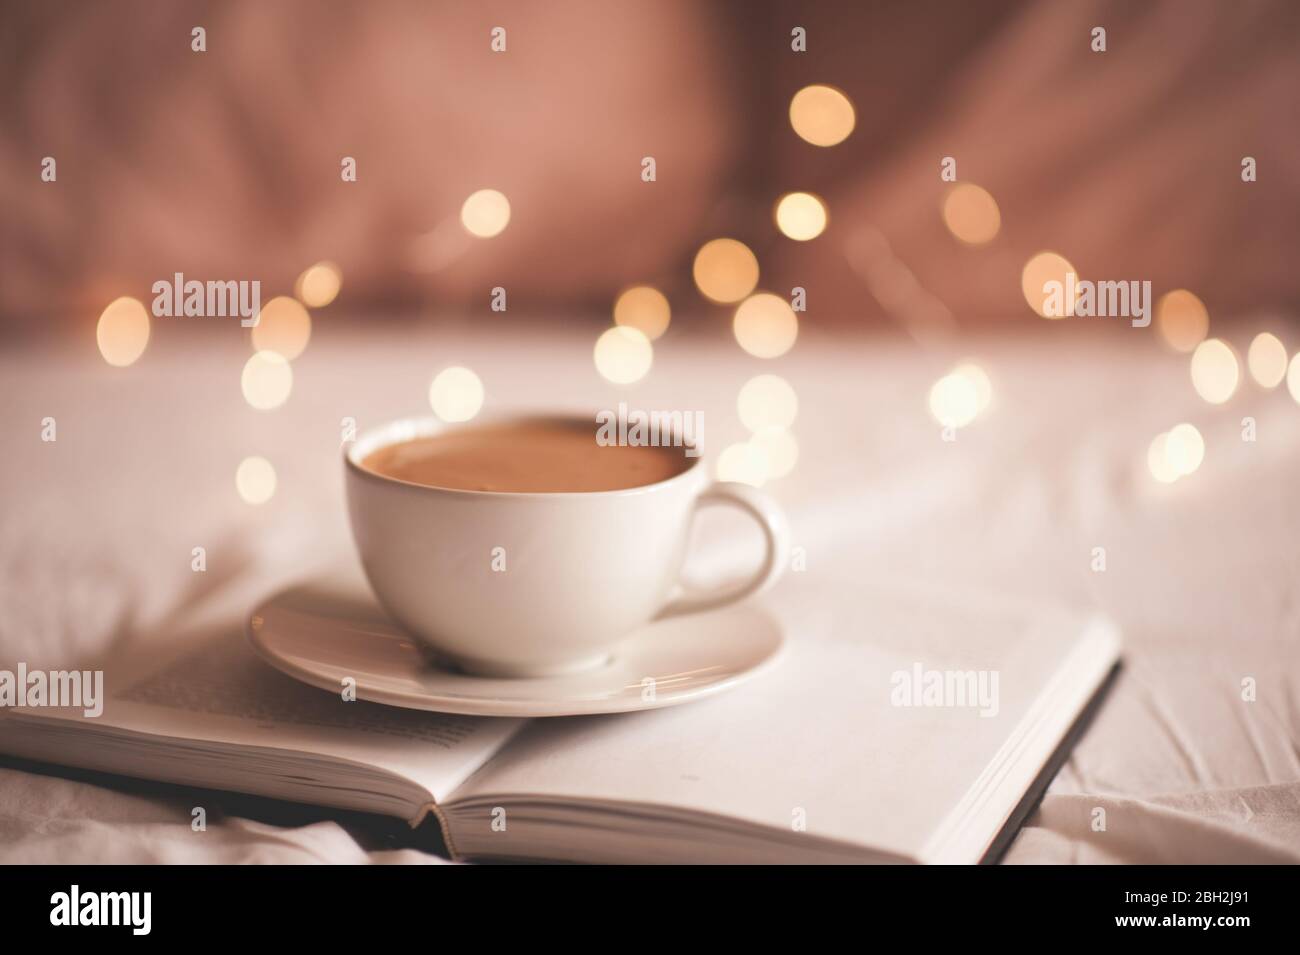 Fresh cup of coffee on paper book over glowing lights closeup ...